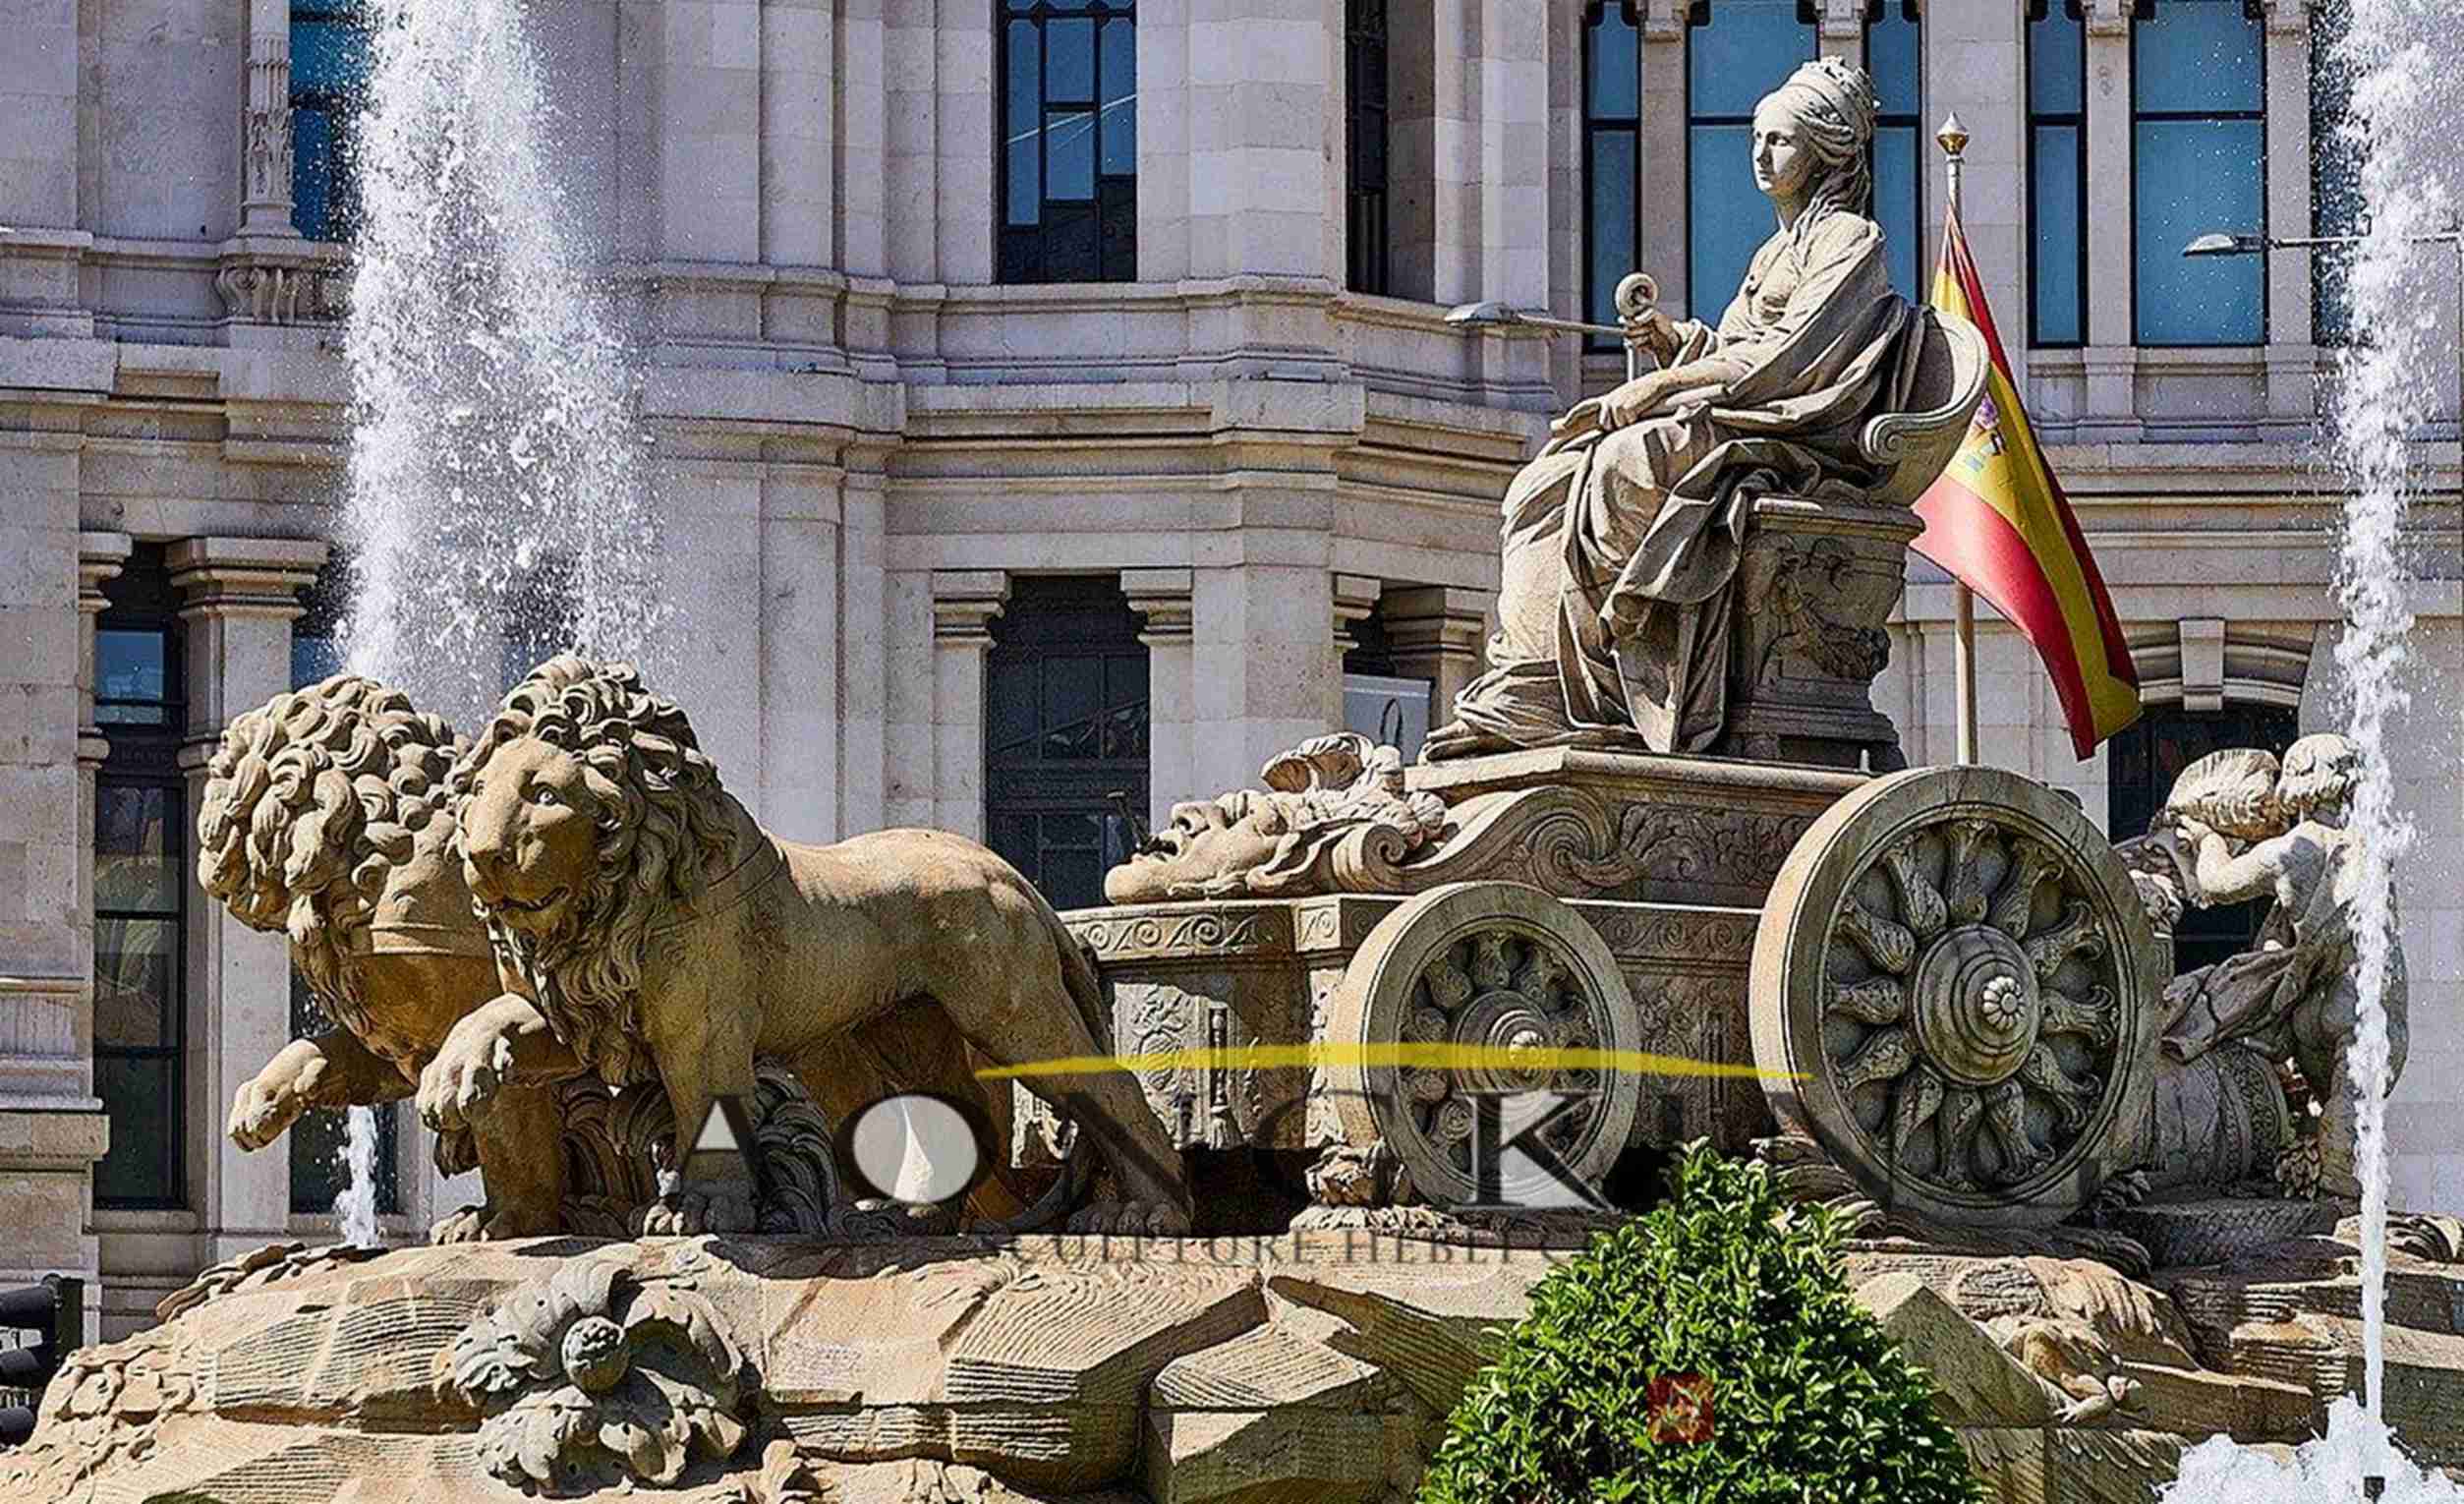 The Greek goddess Cibeles with marble sculptures (2)